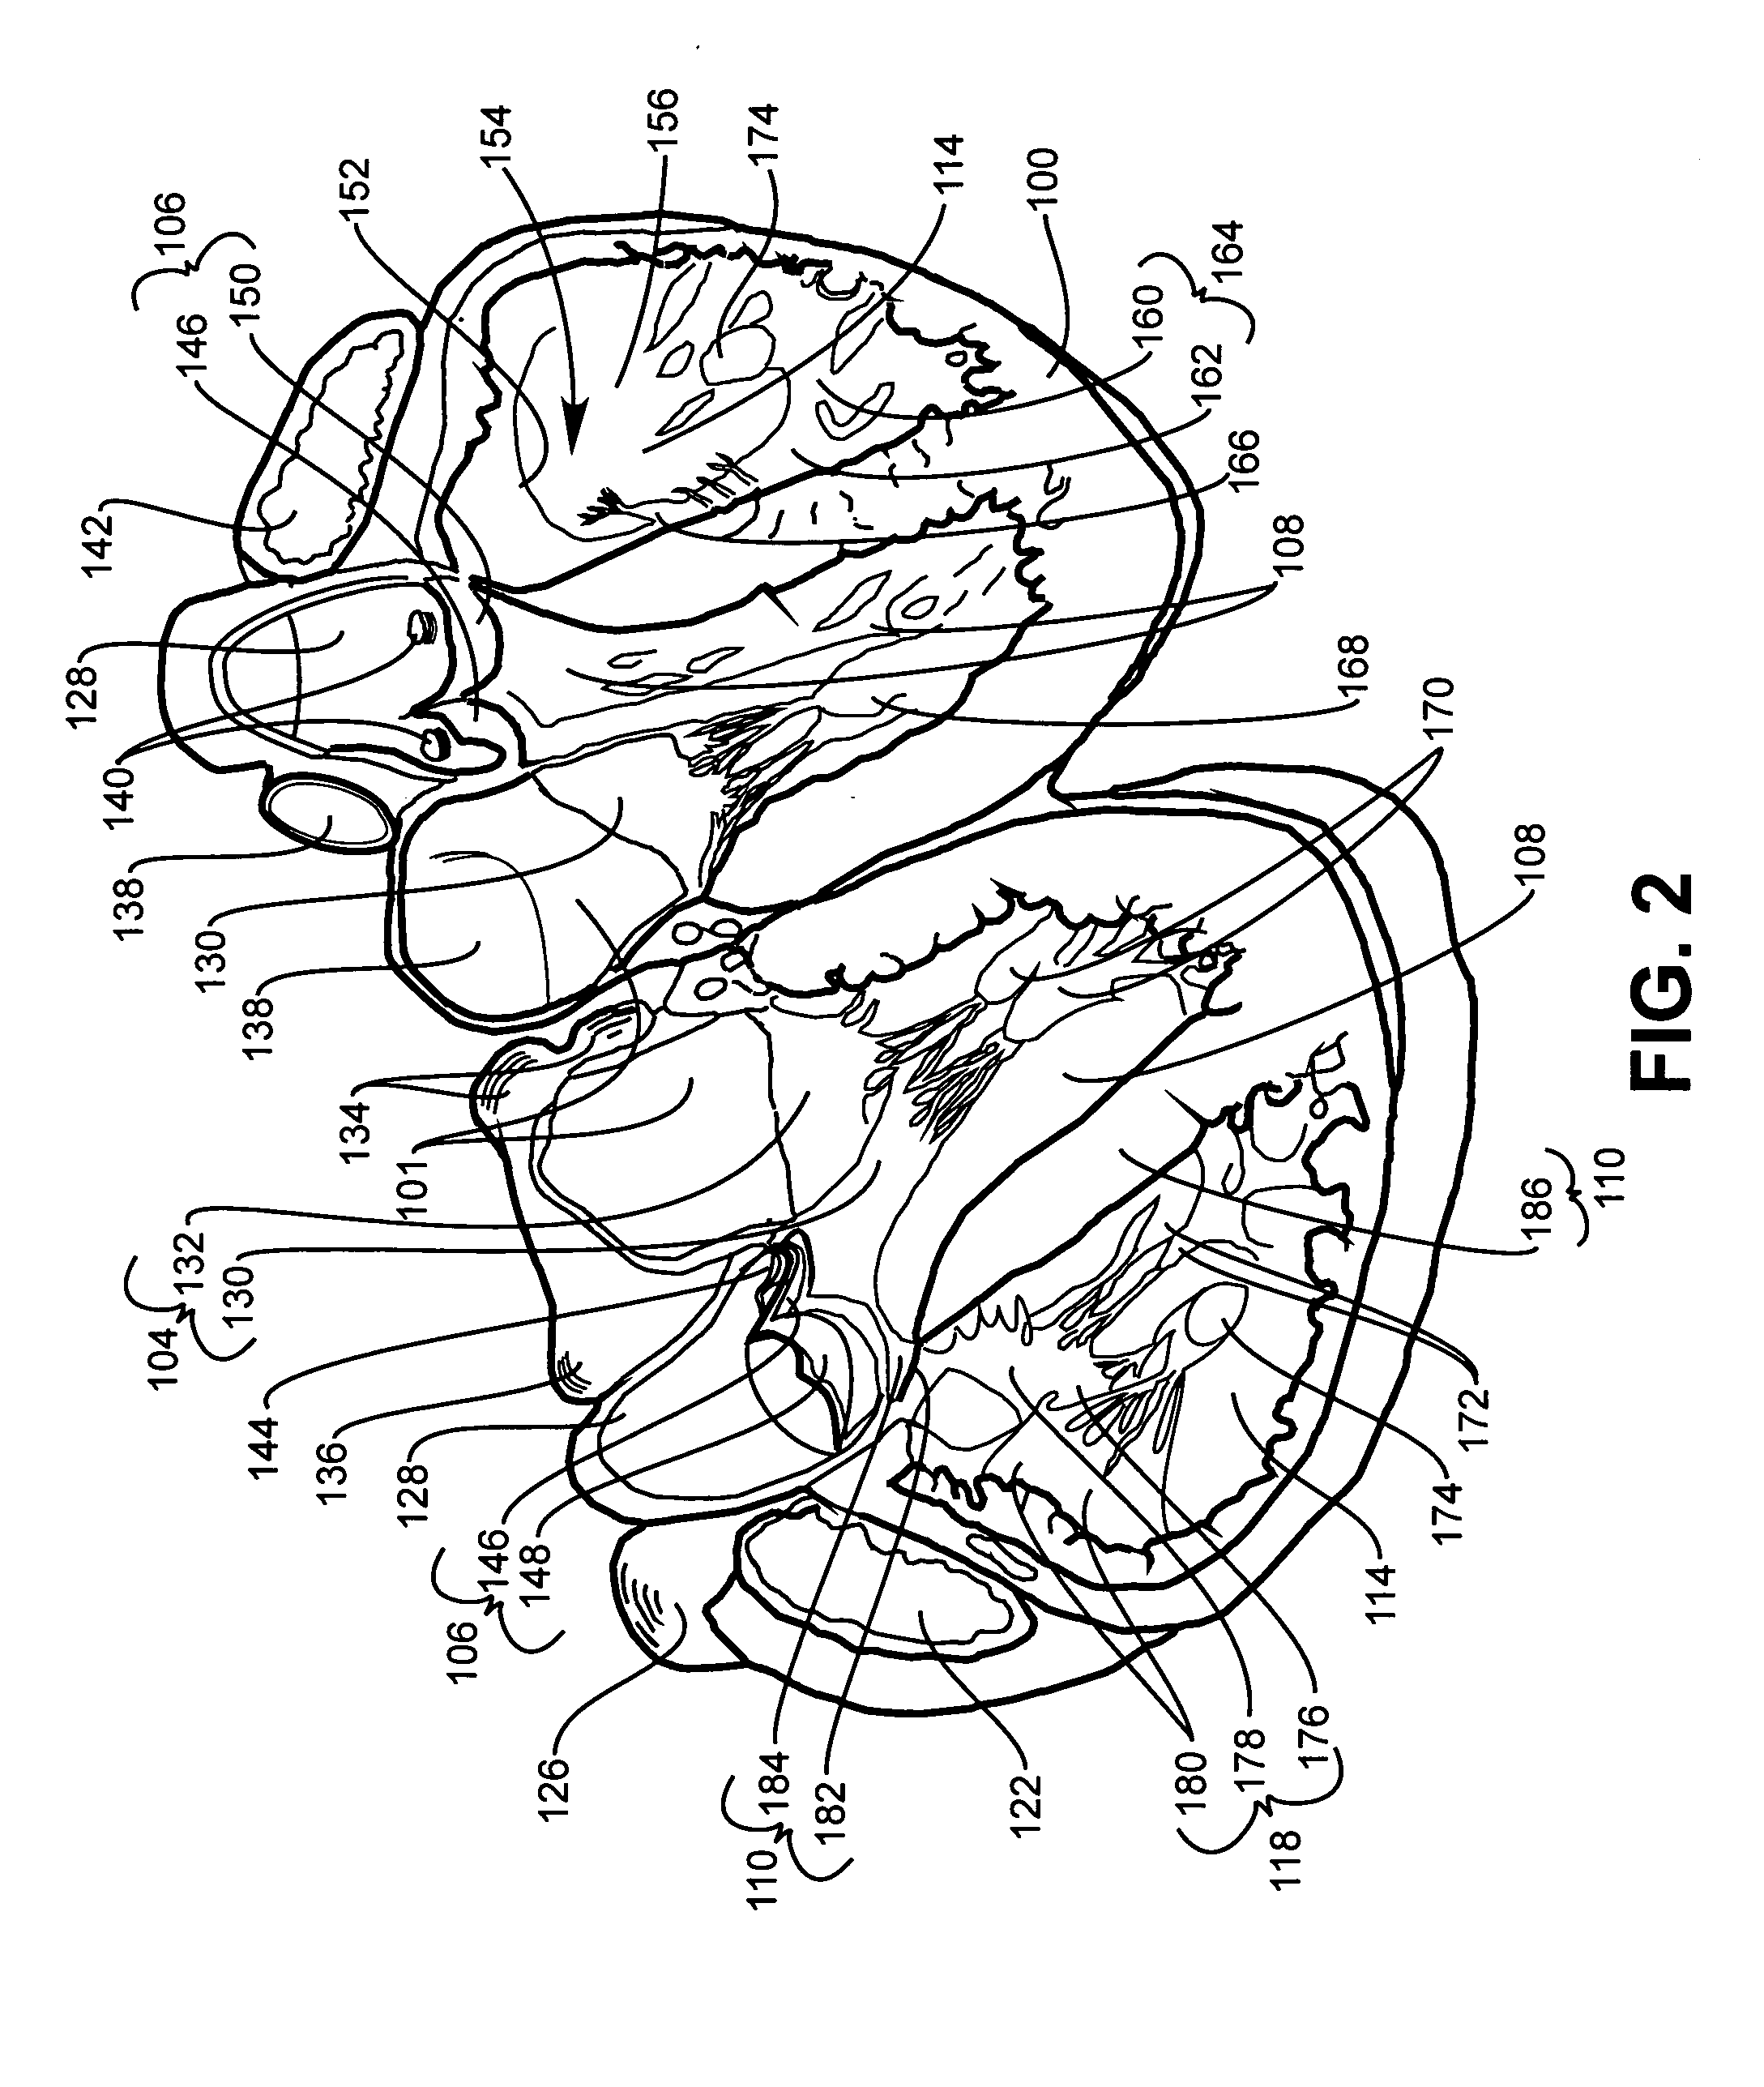 Infusion treatment agents, catheters, filter devices, and occlusion devices, and use thereof